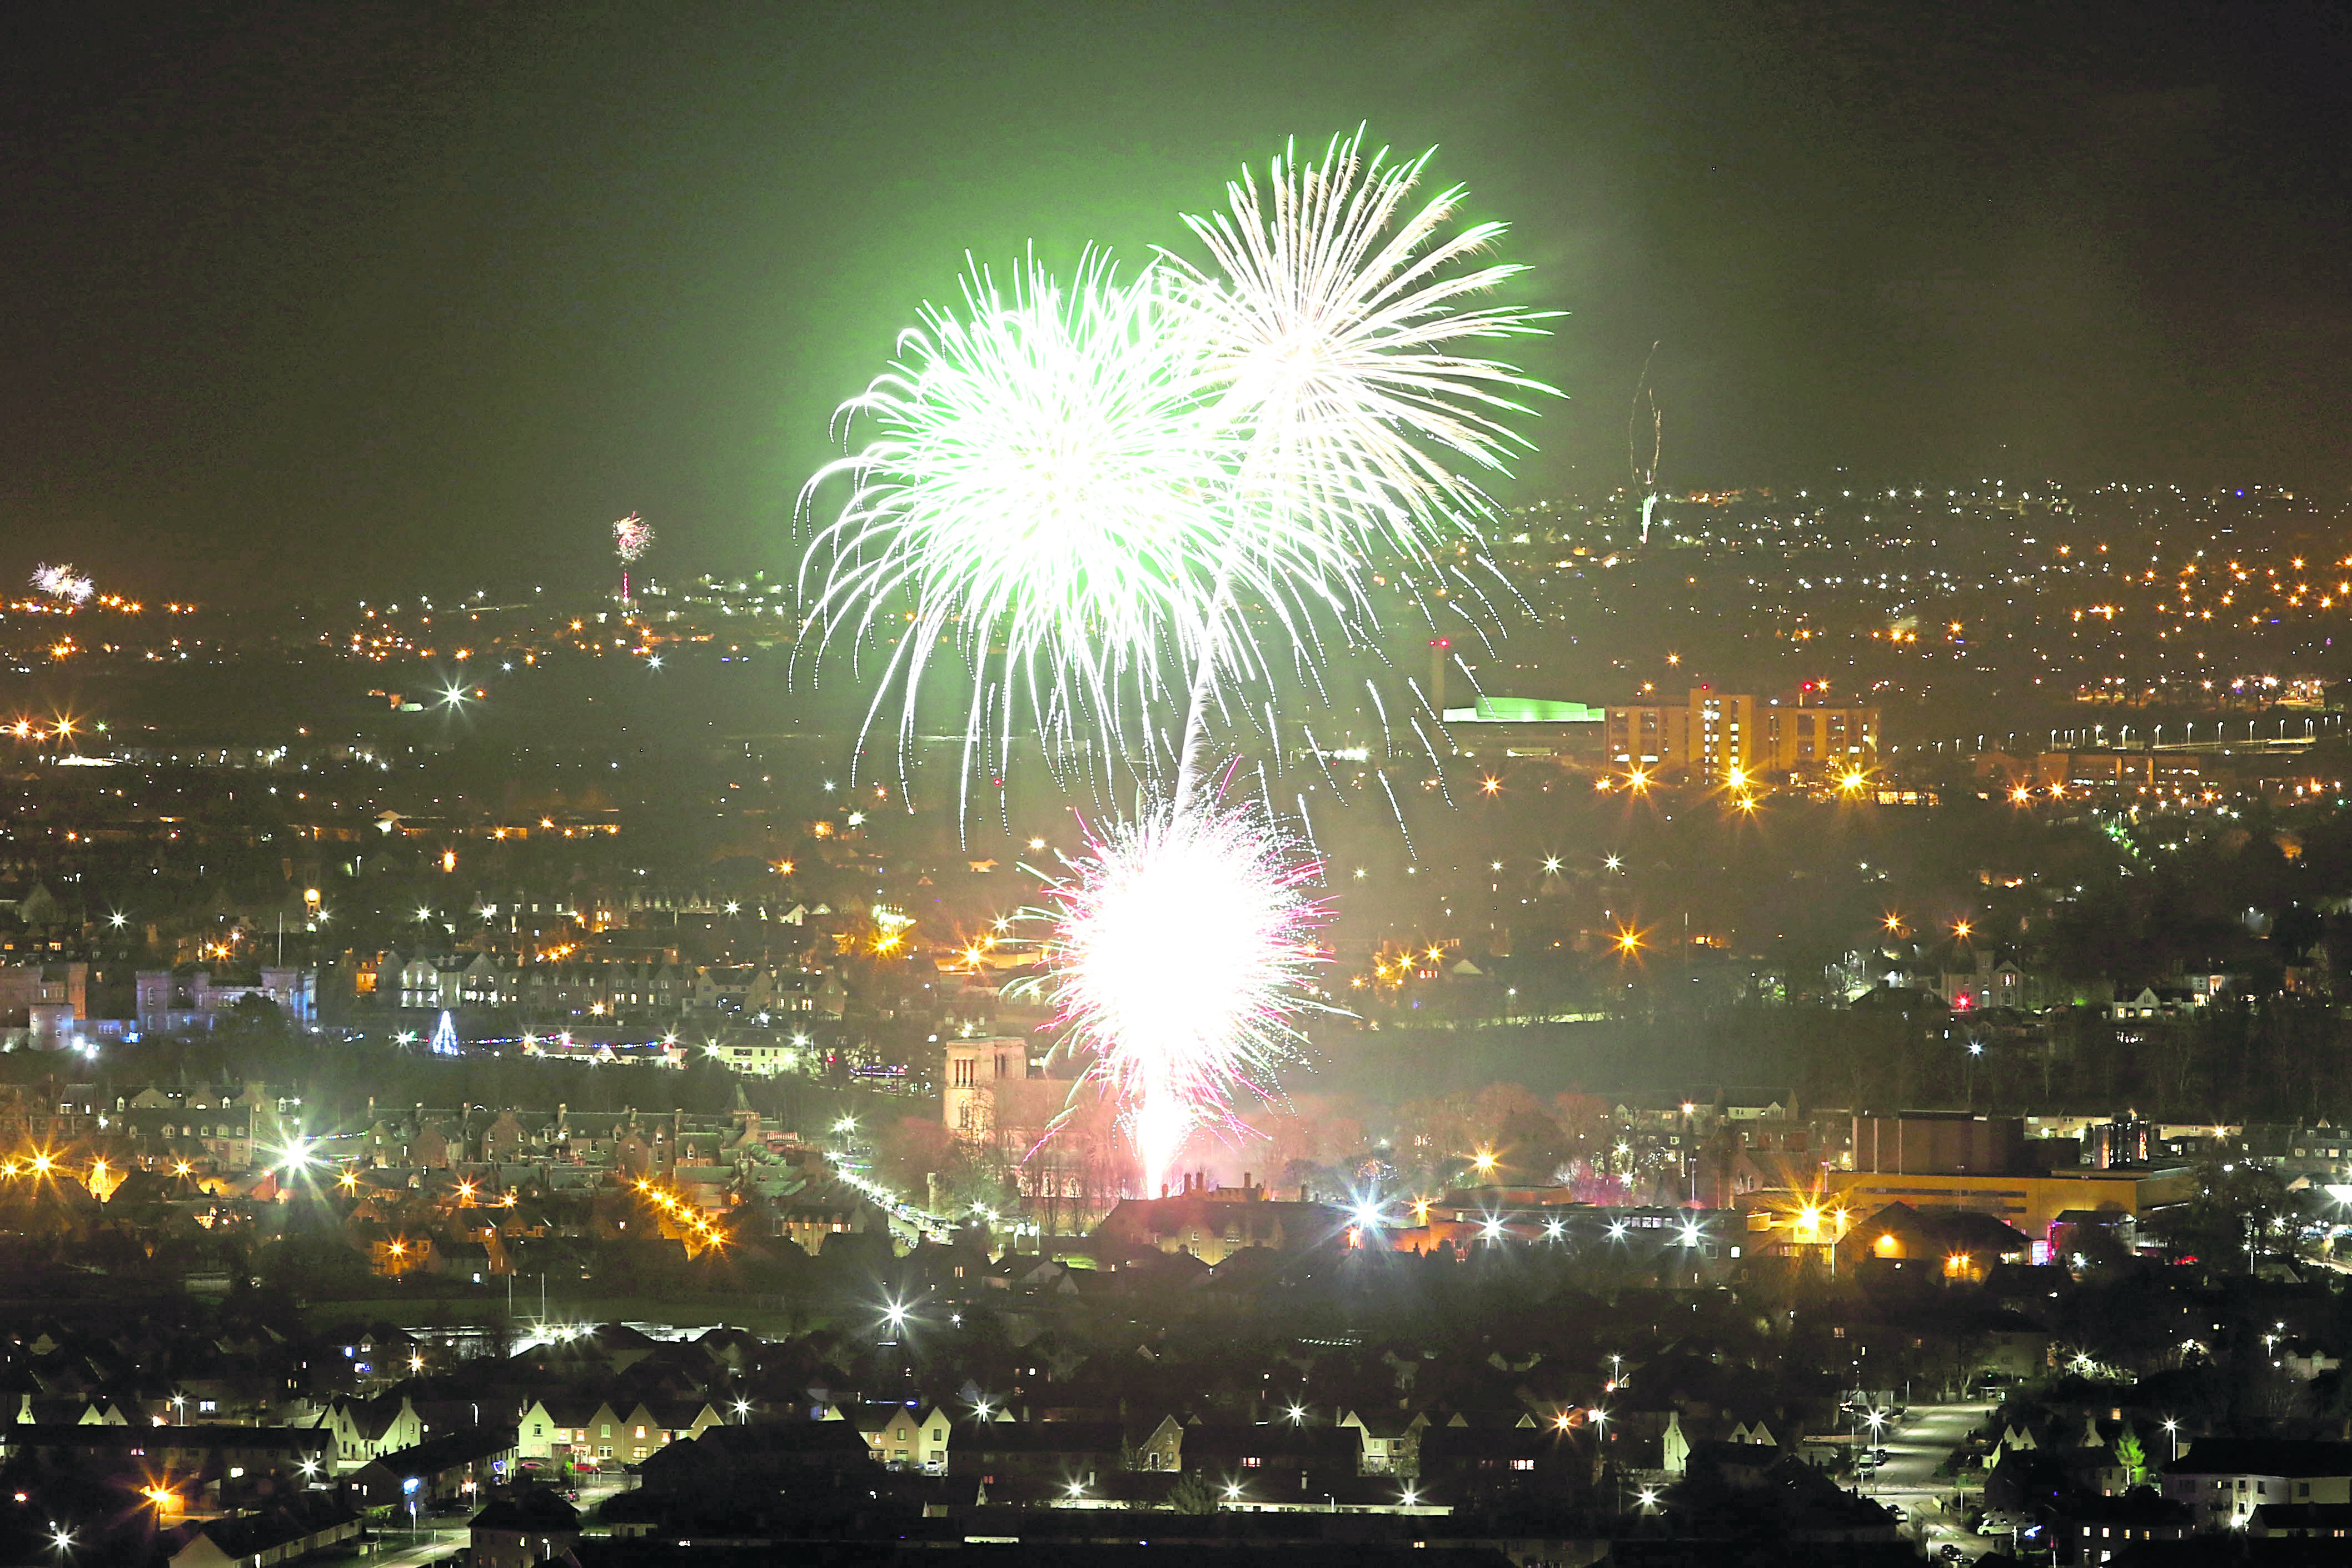 The sky over Inverness is dominated by fireworks to mark the New Year.